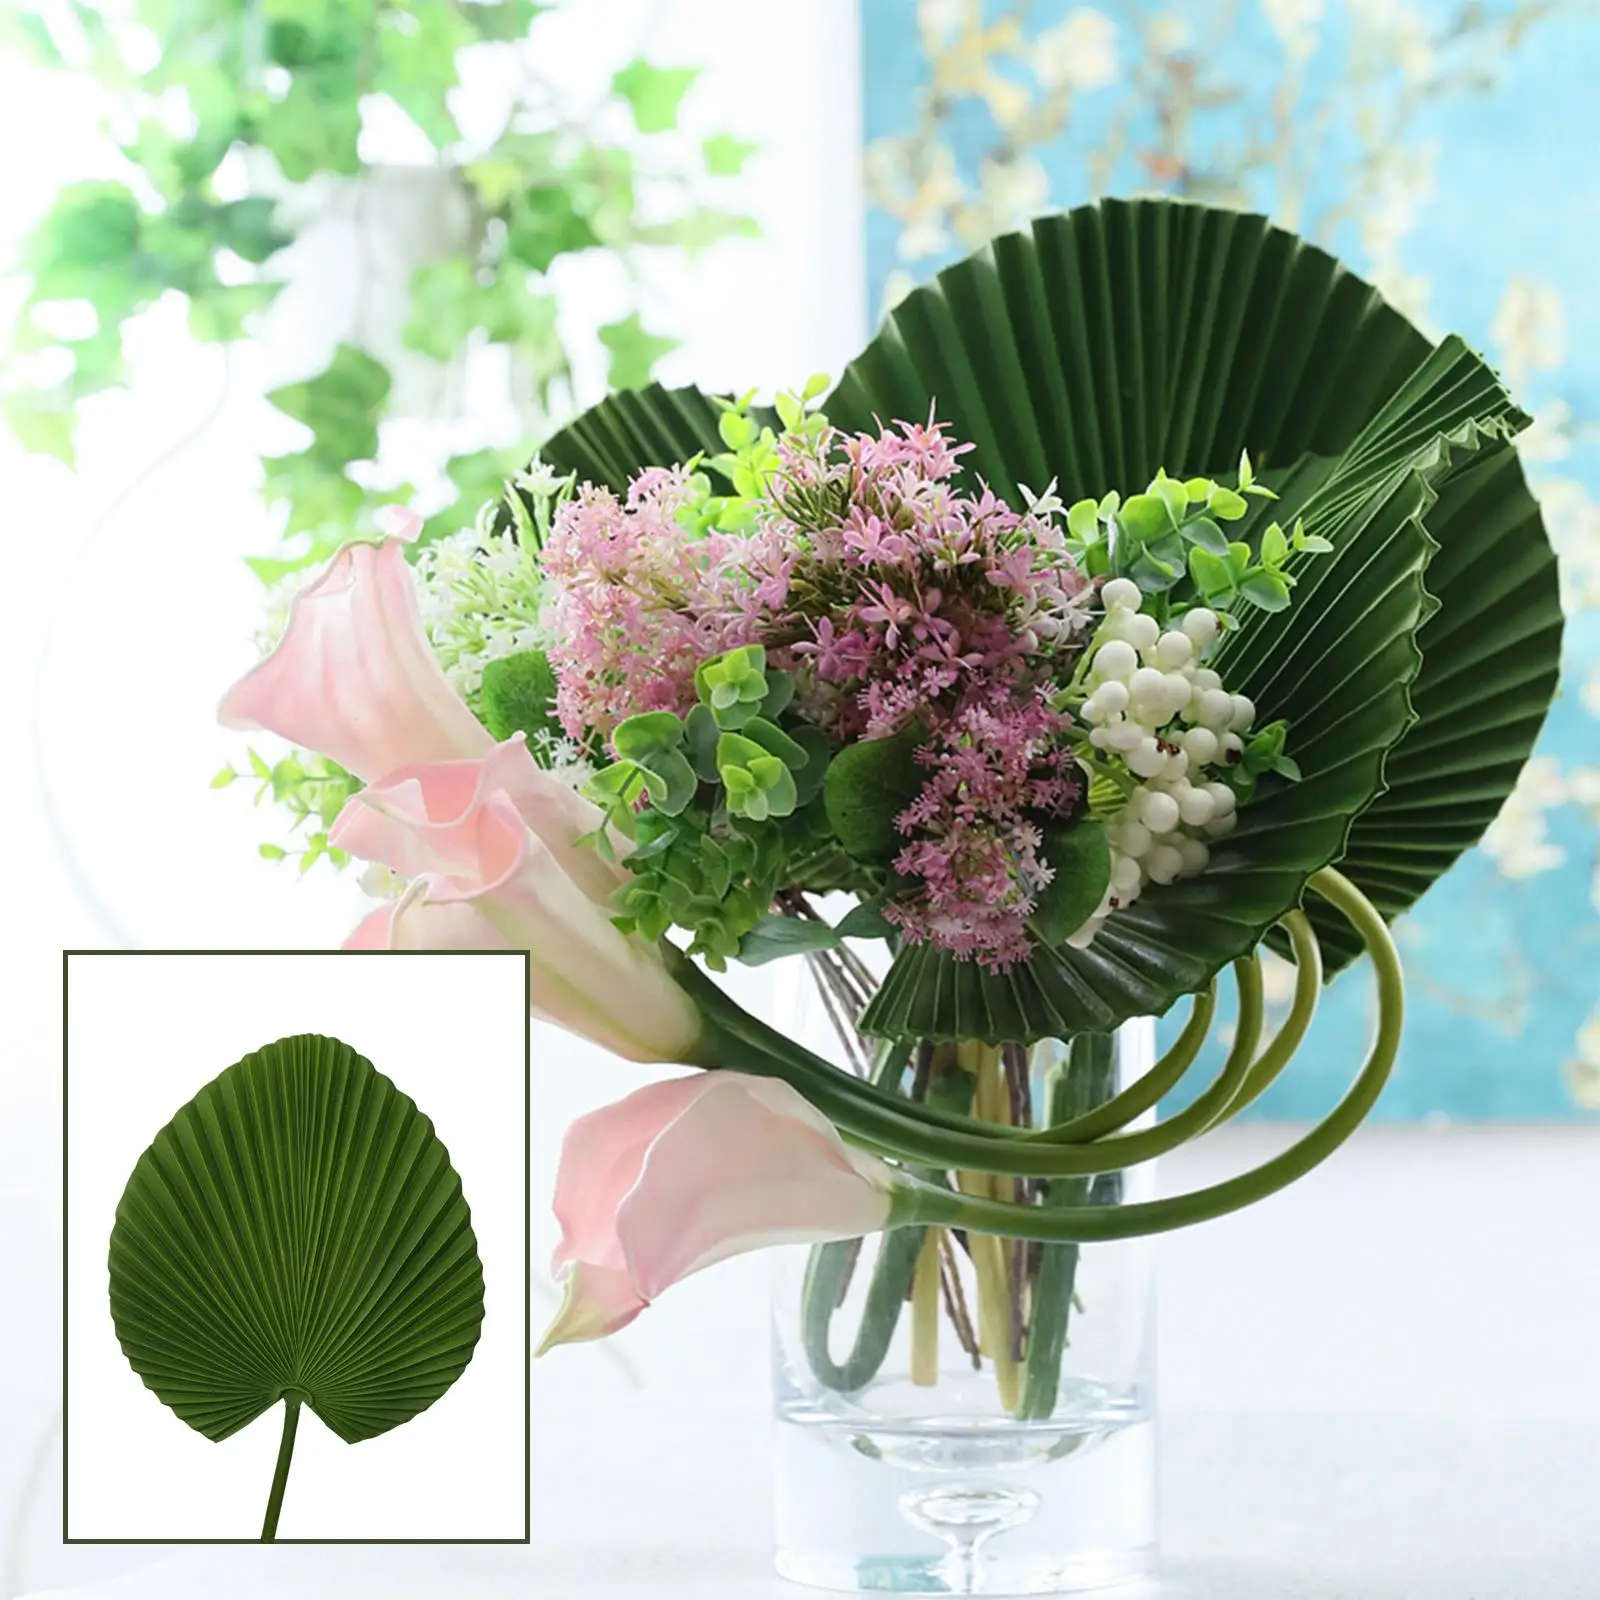 Green Artificial Palm Leaf Fake Palm Fan Hawaiian Plant Leaves Tropical Foliage for Vase Party Wedding Centerpieces Decoration